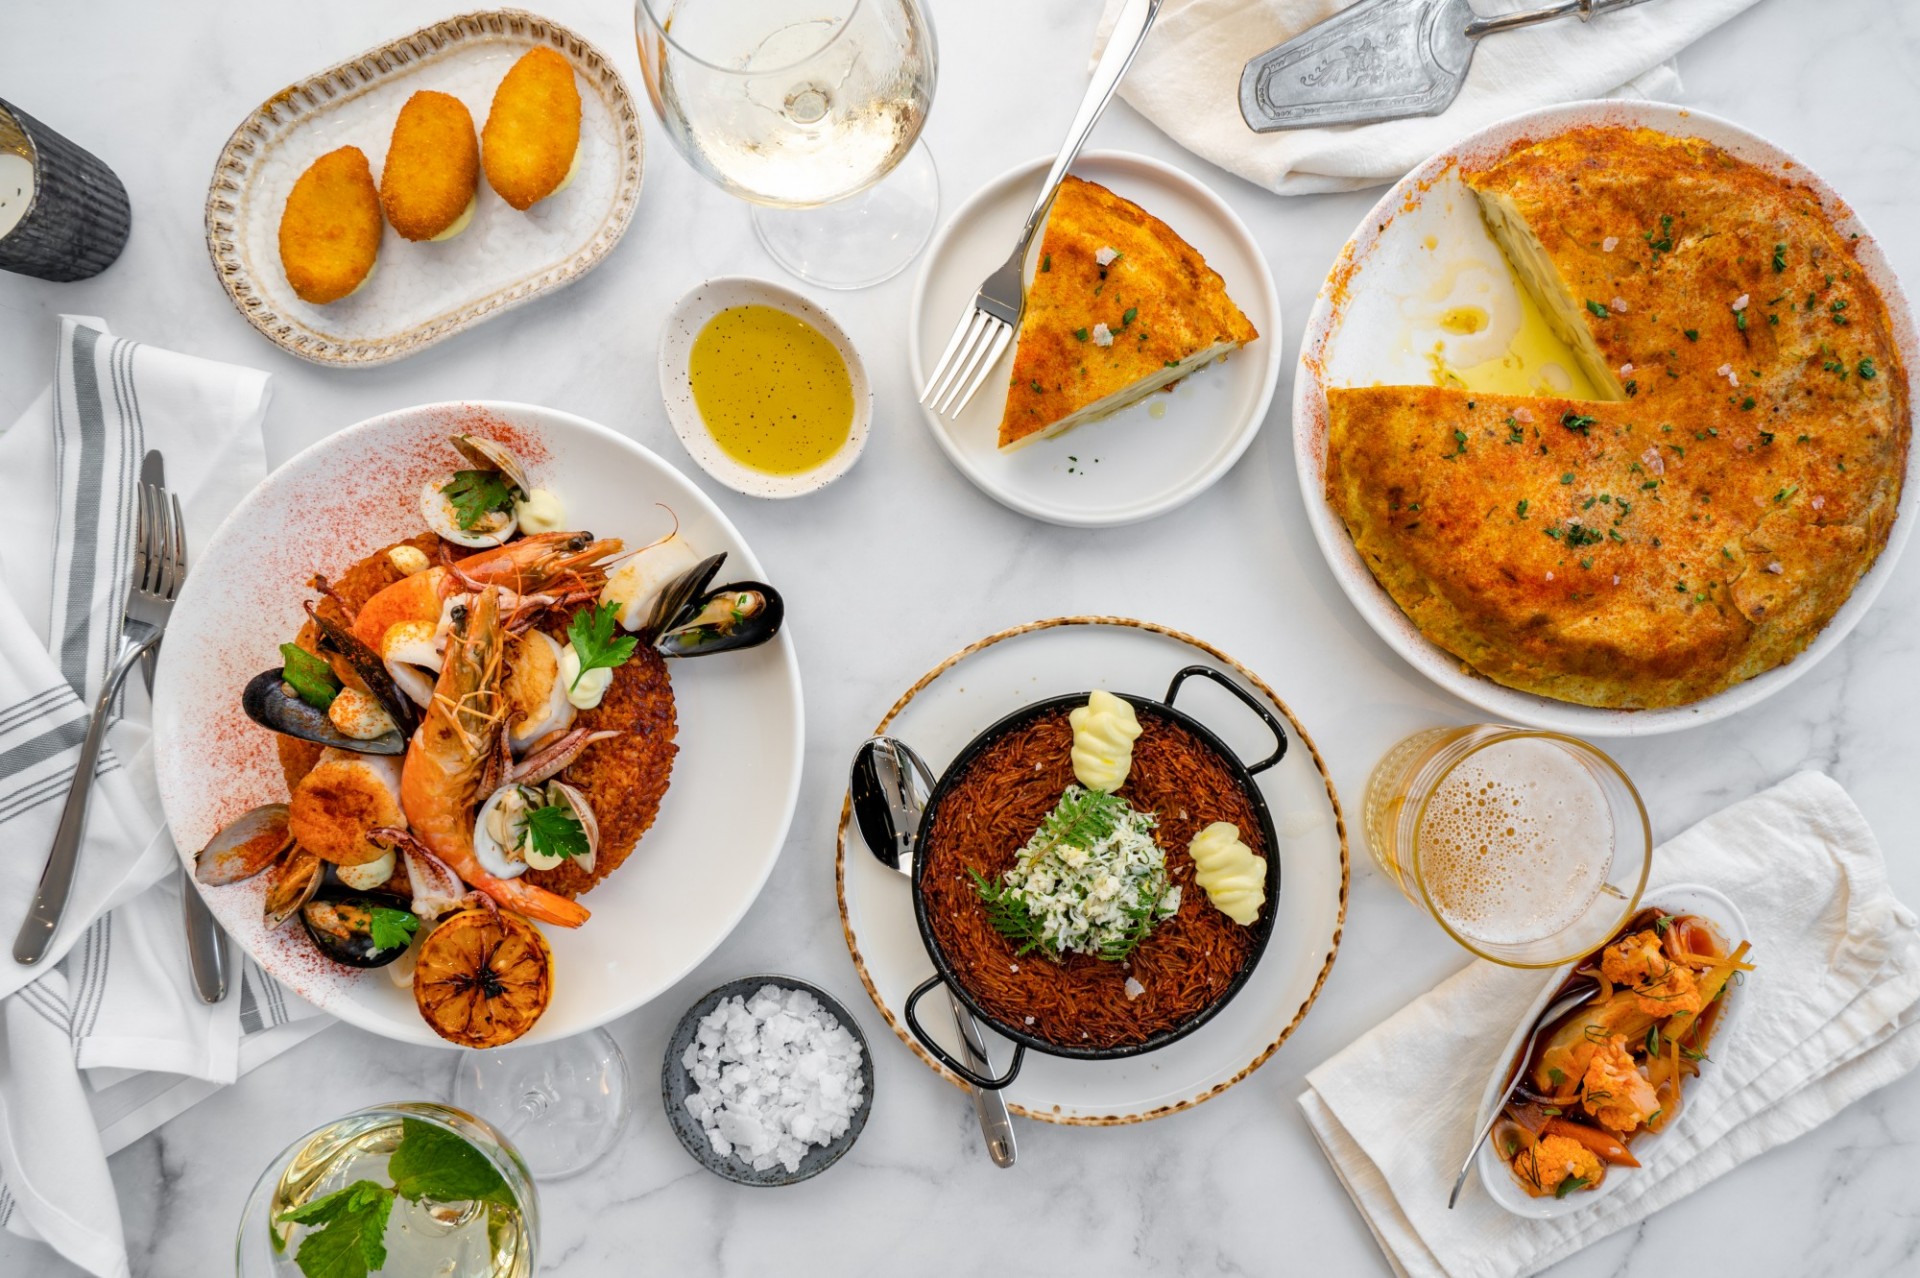 A selection of tapas available at Oliva.